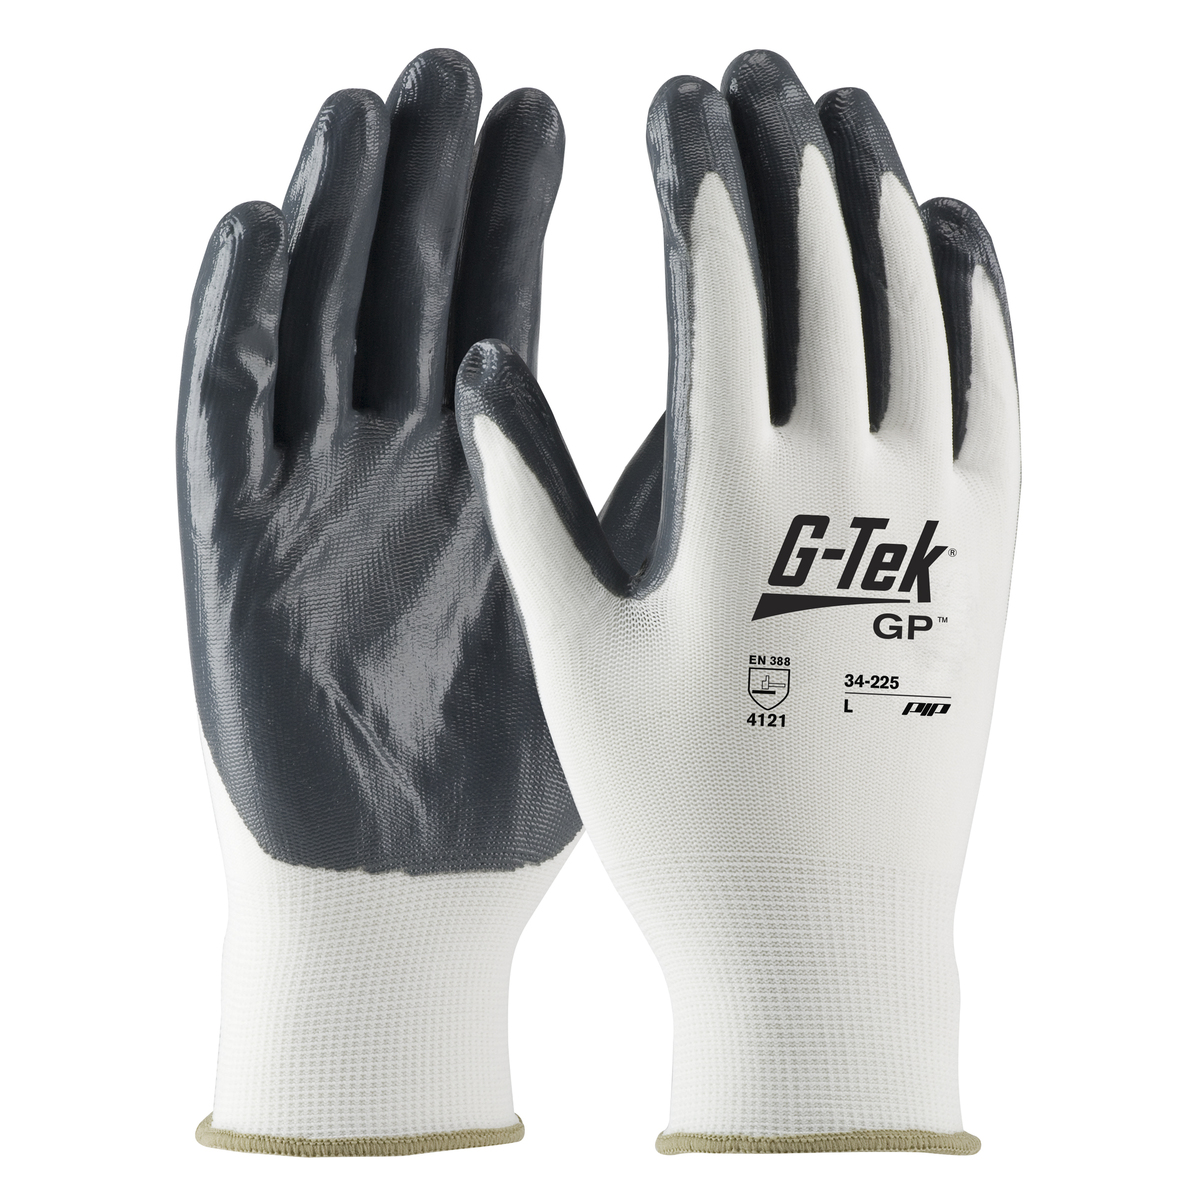 PIP® X-Large G-Tek® 13 Gauge Gray Nitrile Palm And Finger Coated Work Gloves With Nylon Liner And Continuous Knit Wrist